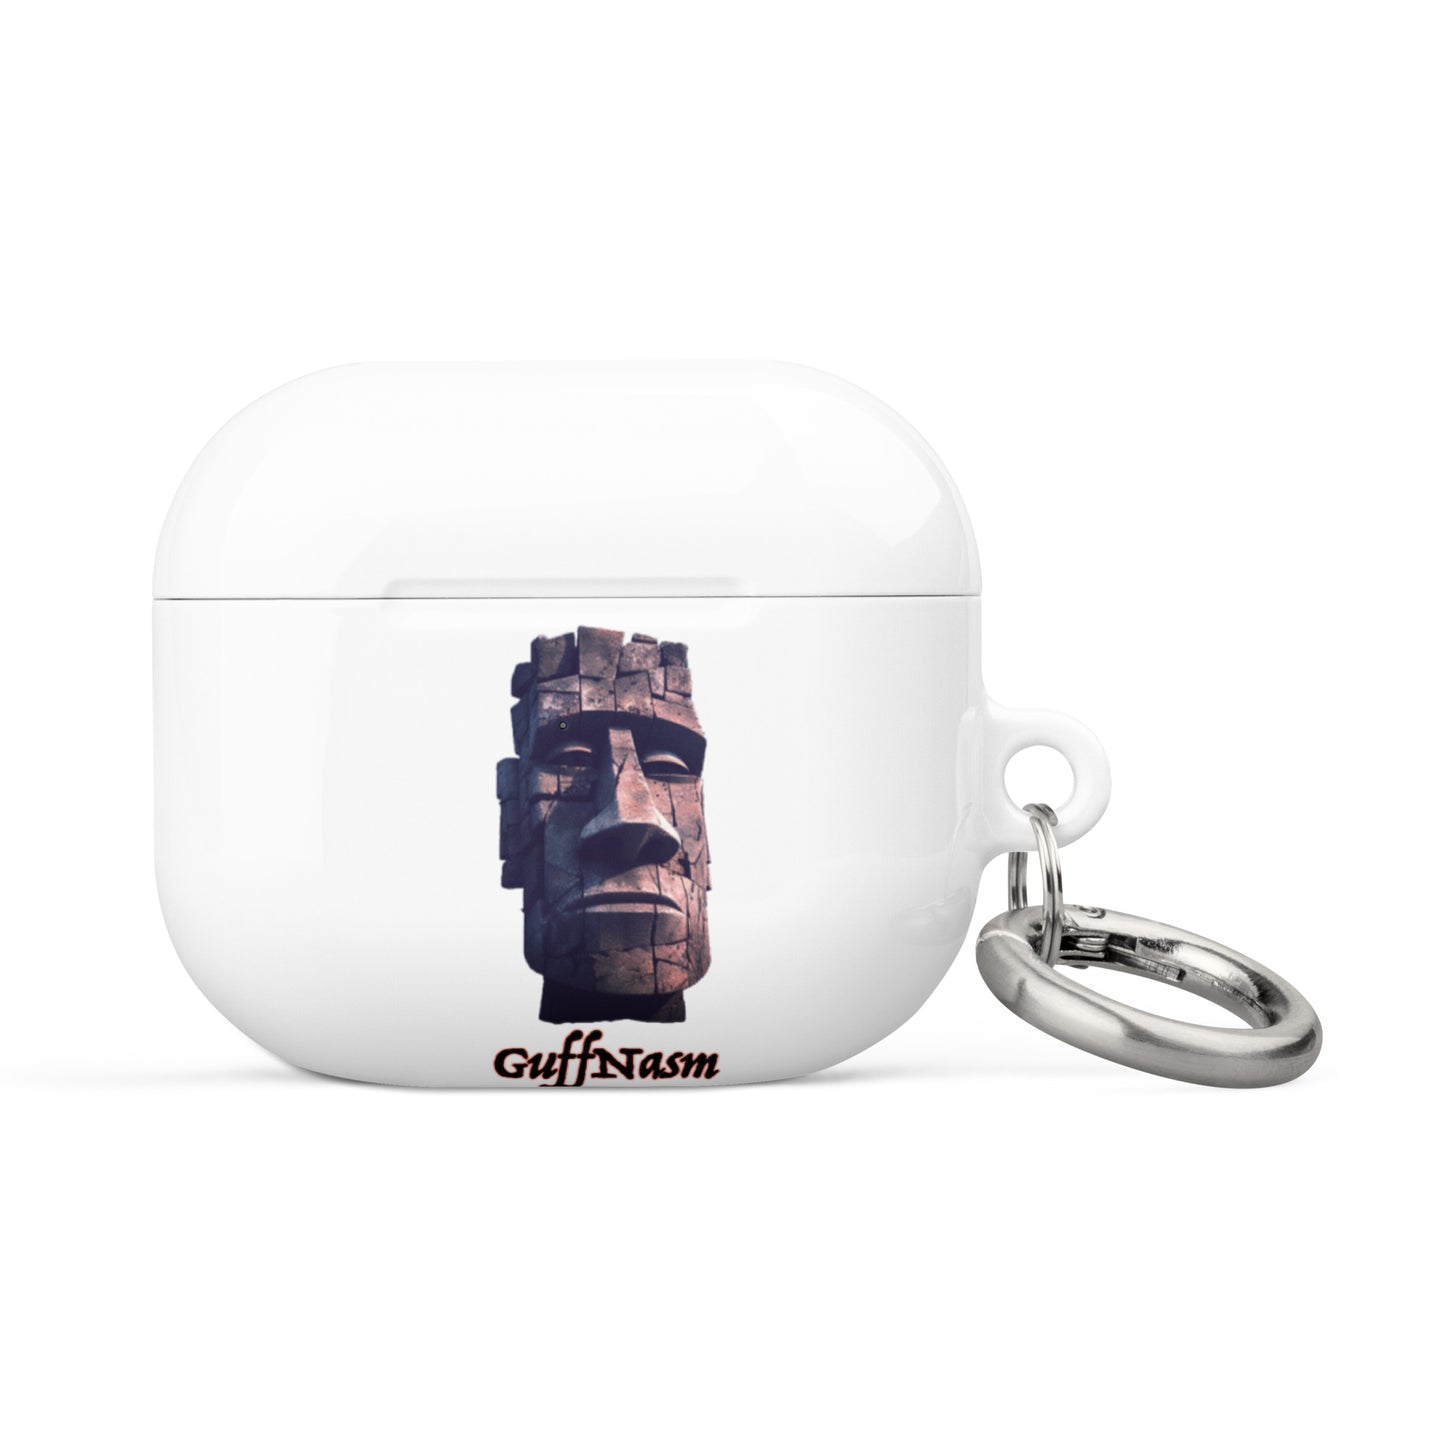 Guffman Case for AirPods®